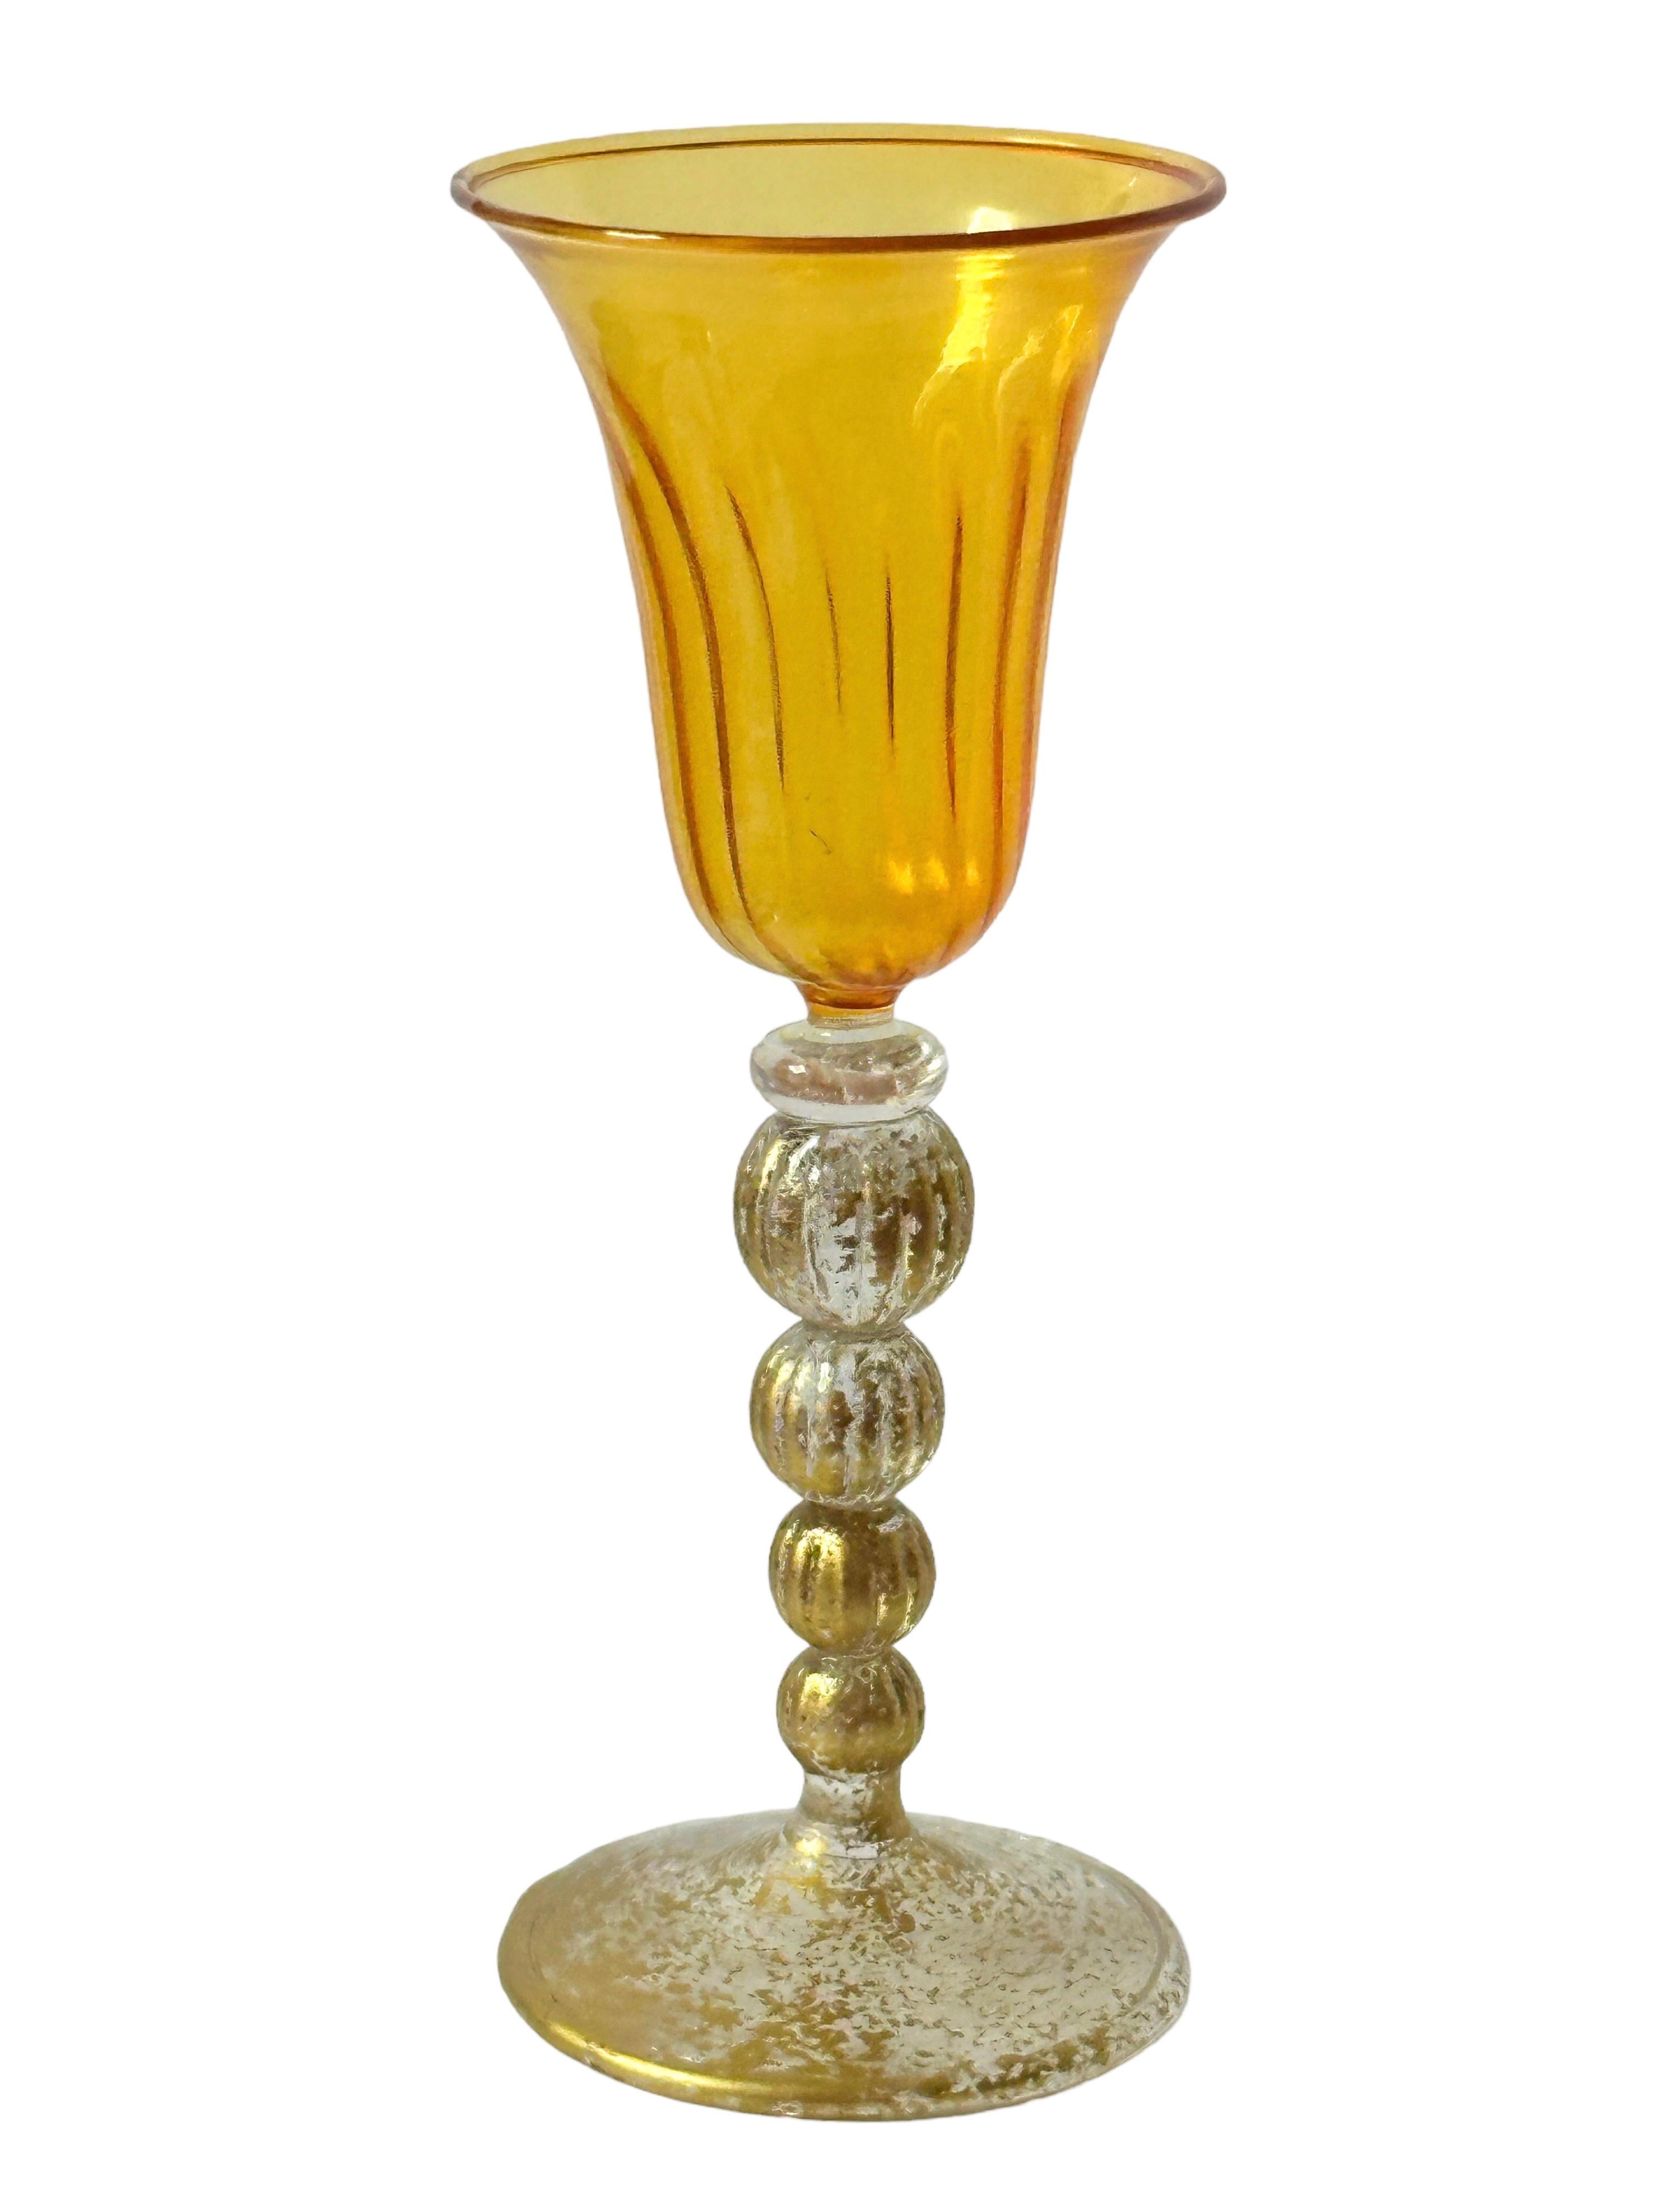 Italian Amber & Gold Stardust Salviati Murano Glass Liqueur Goblet, Vintage Italy  For Sale